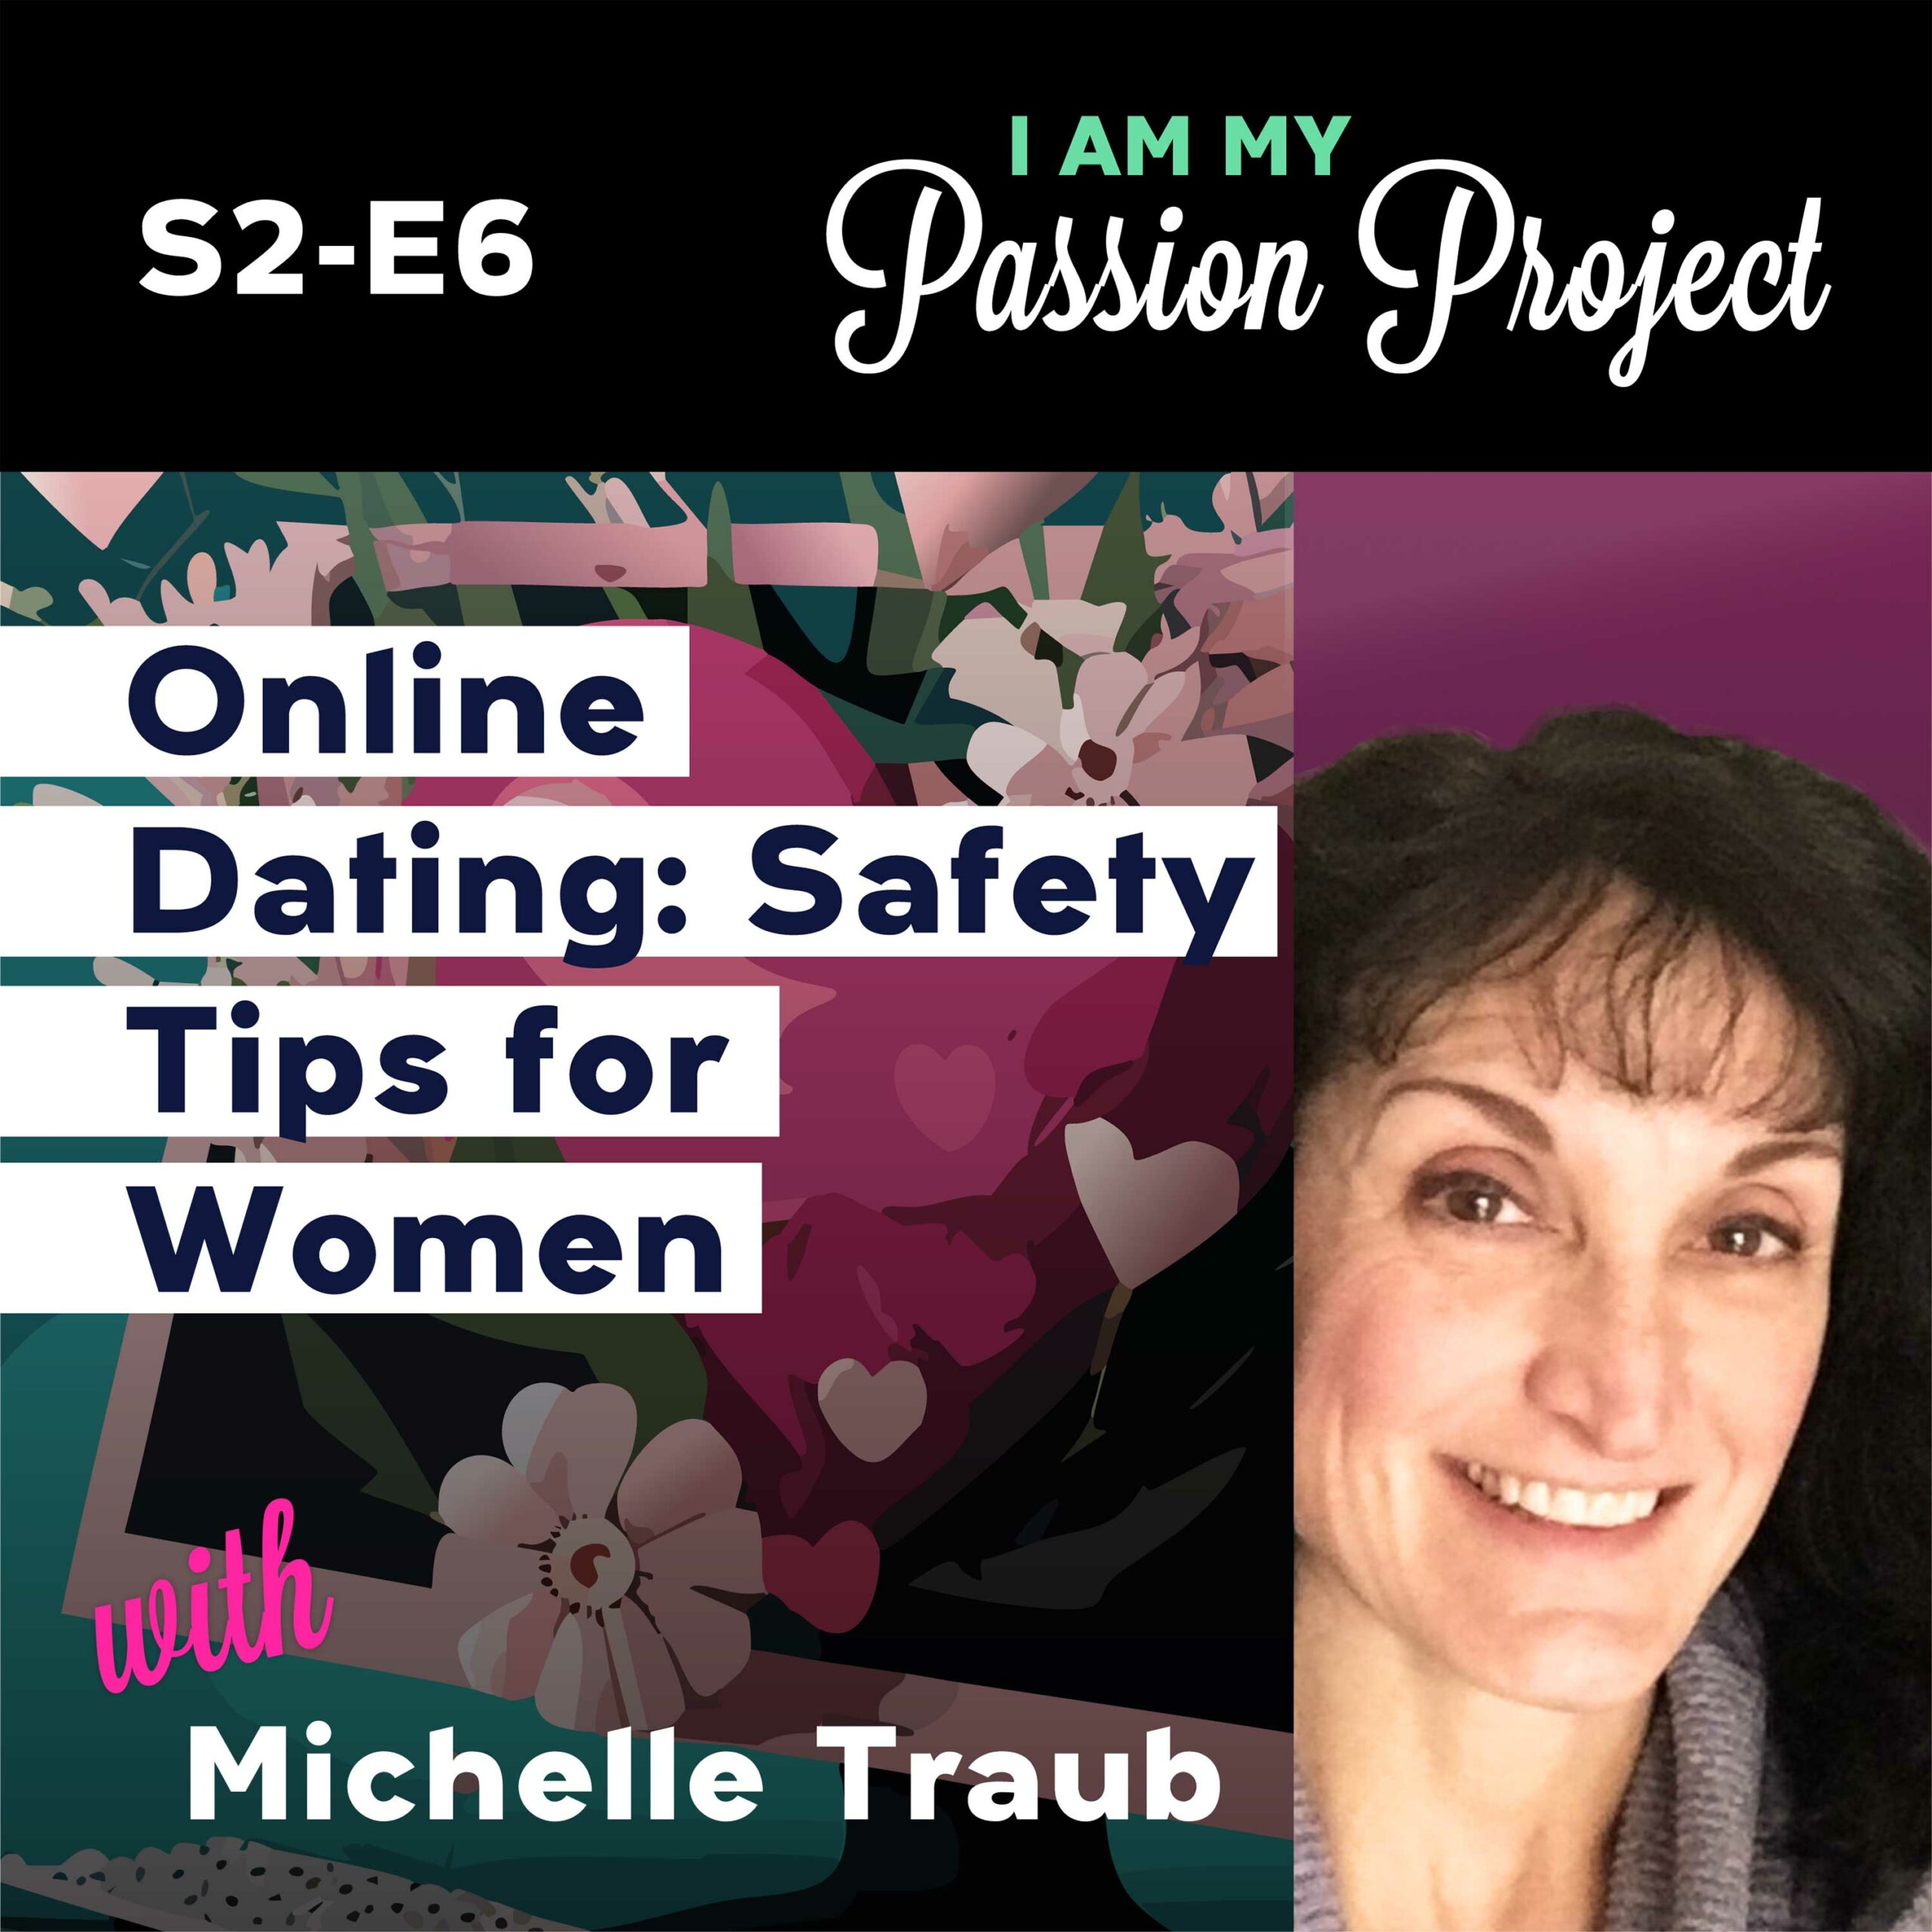 Online Dating: Safety Tips for Women with Michelle Traub